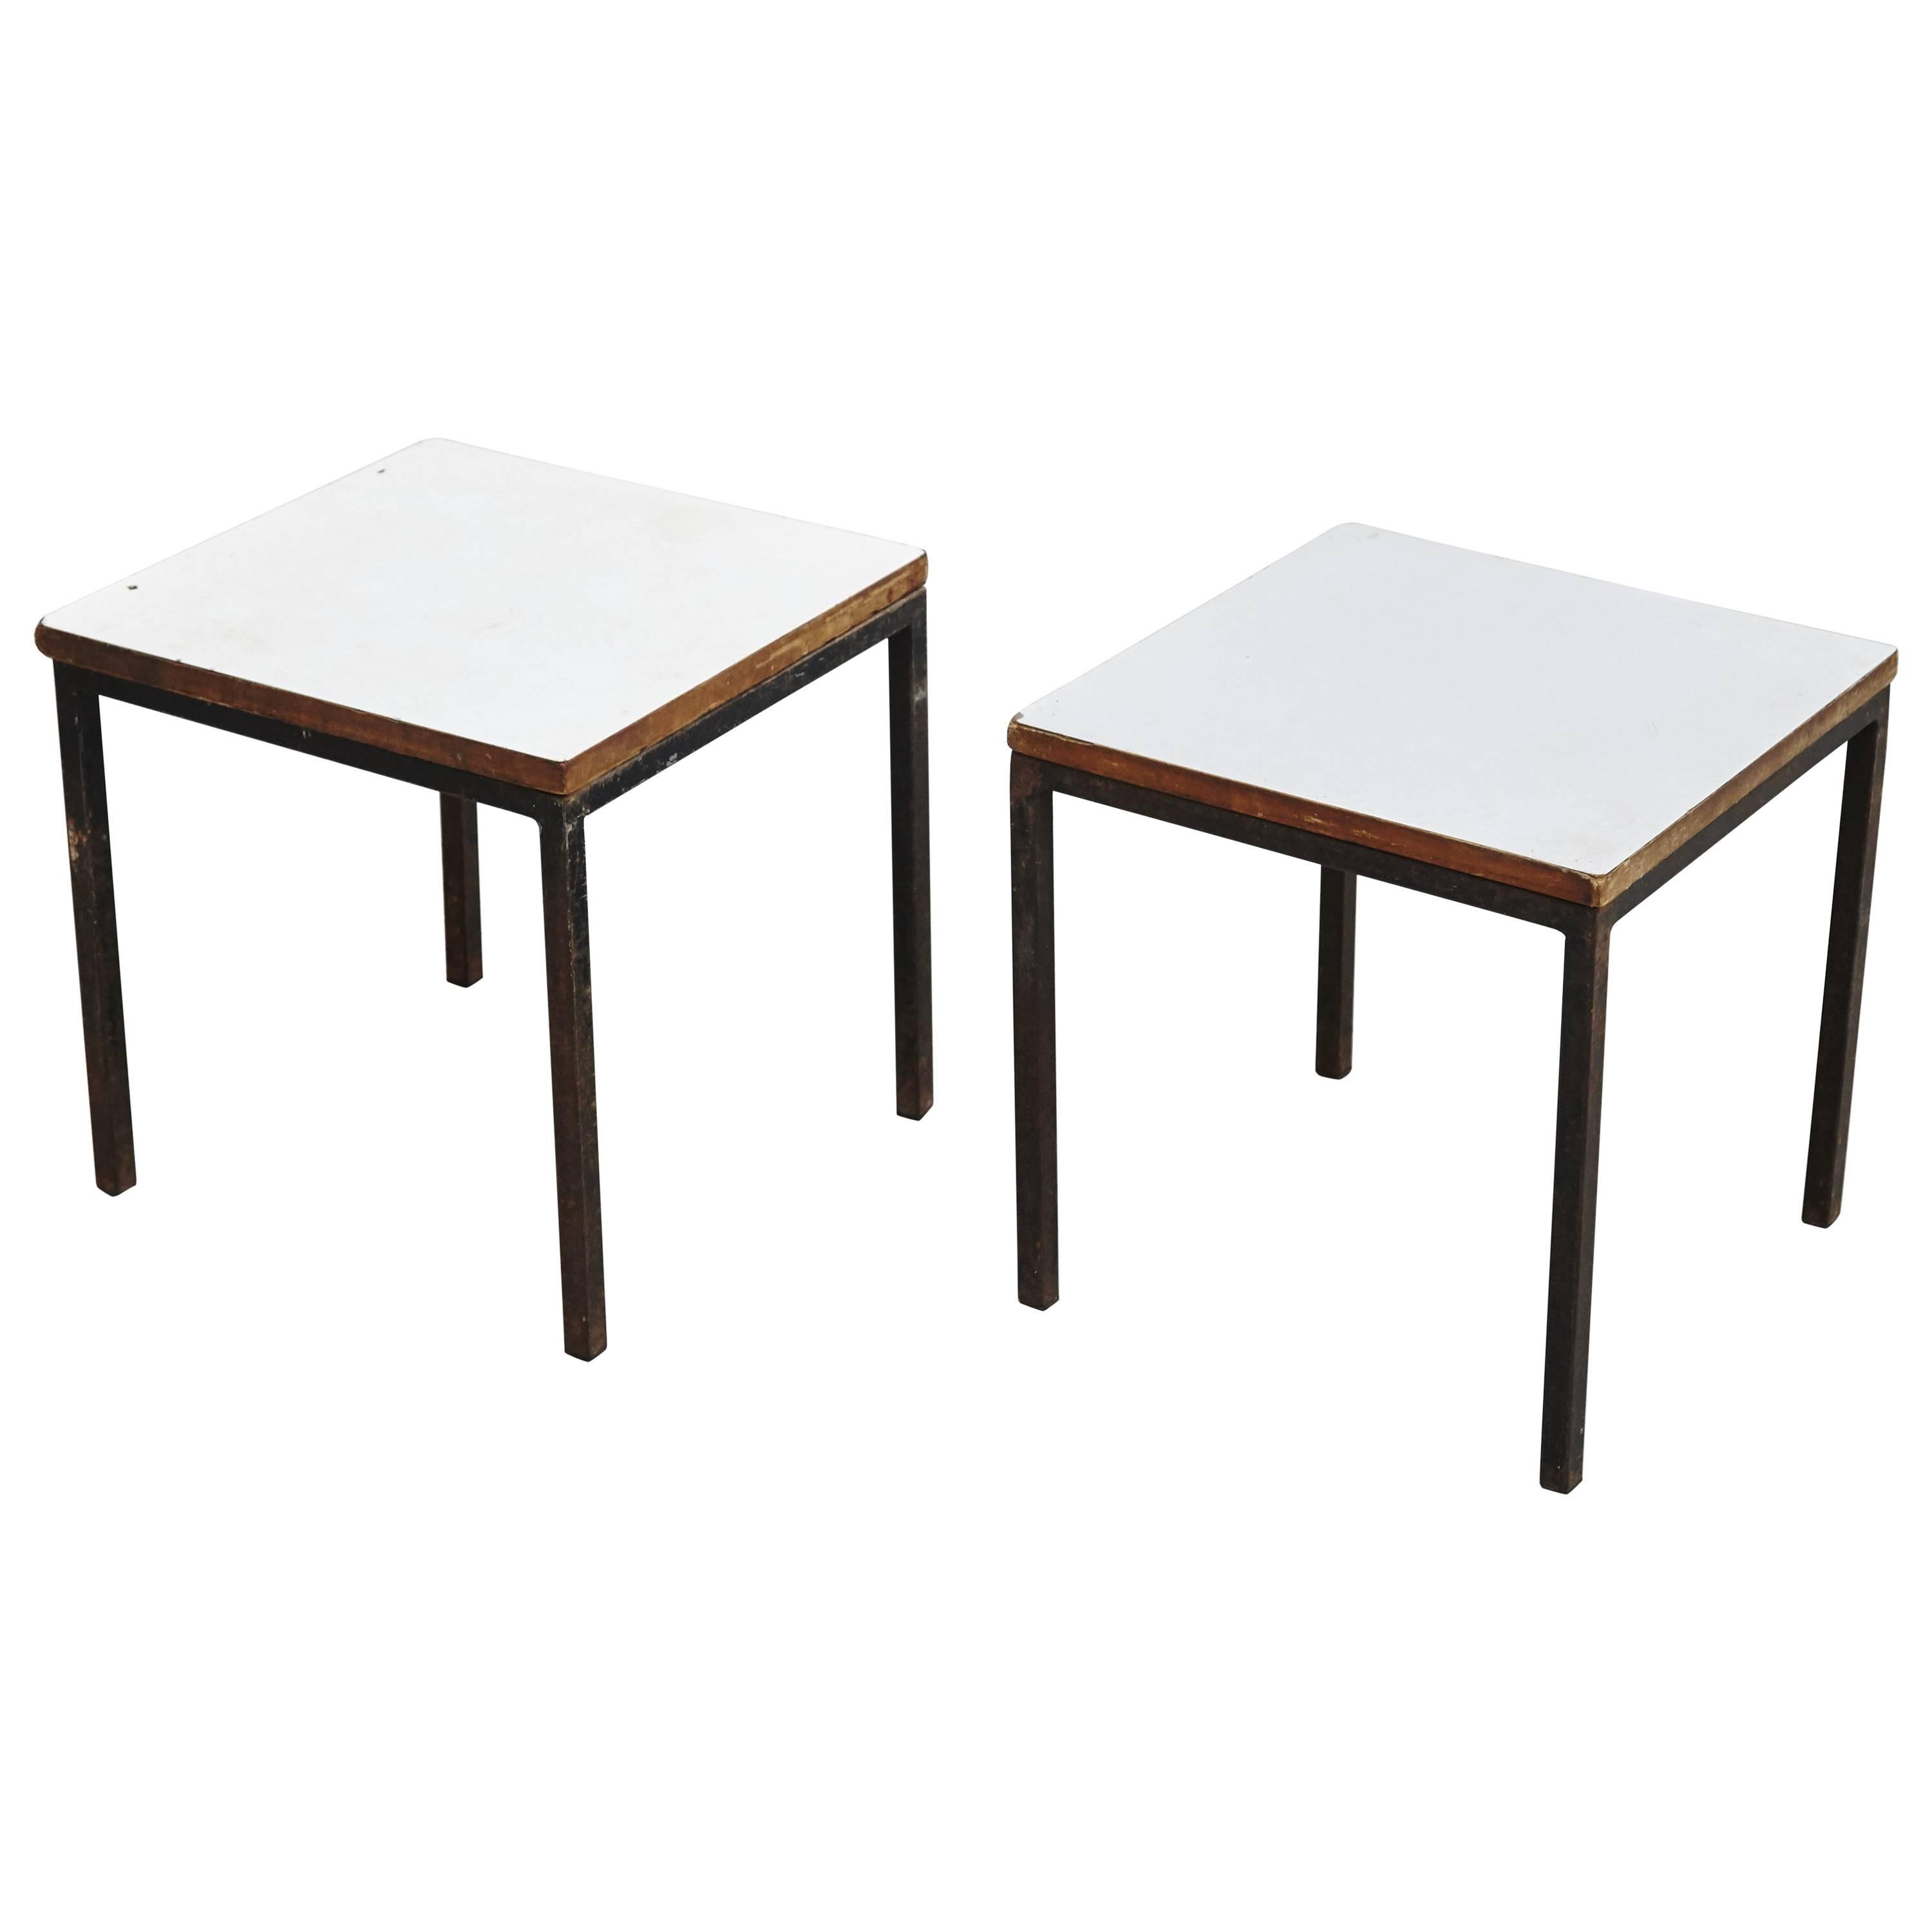 A pair of T-angle side tables designed by Florence Knoll and manufactured by Knoll. 
Metal legs and formica tabletops. 

In good original condition, with minor wear consistent with age and use.

Florence Knoll Bassett is an American architect